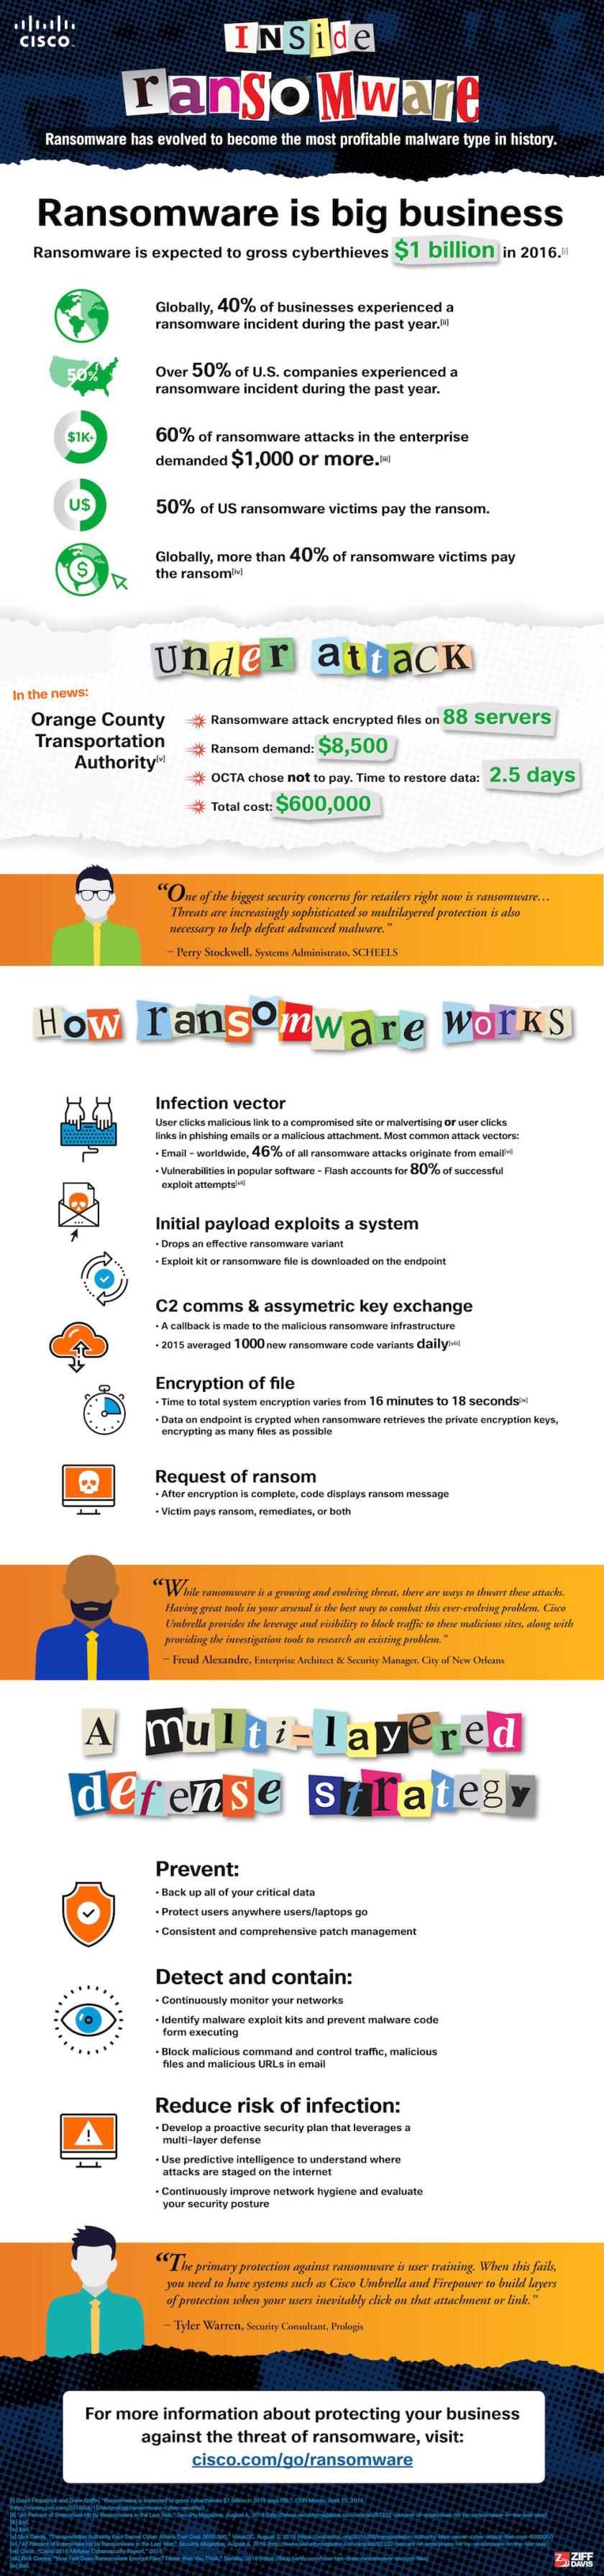 ransomware-infographic